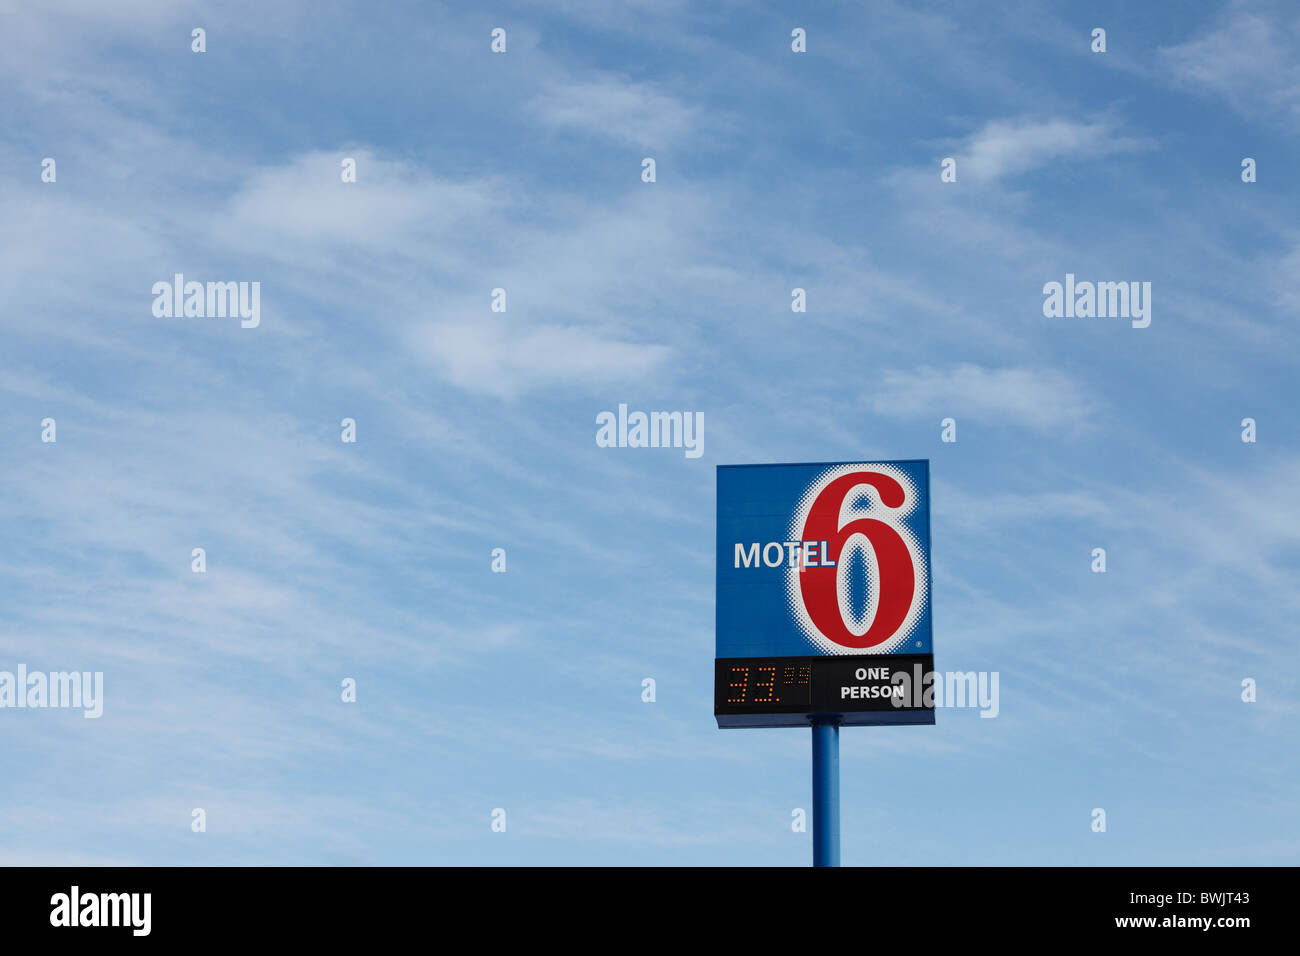 A Motel 6 sign advertising room rates for $33.99 per night - USA. Stock Photo